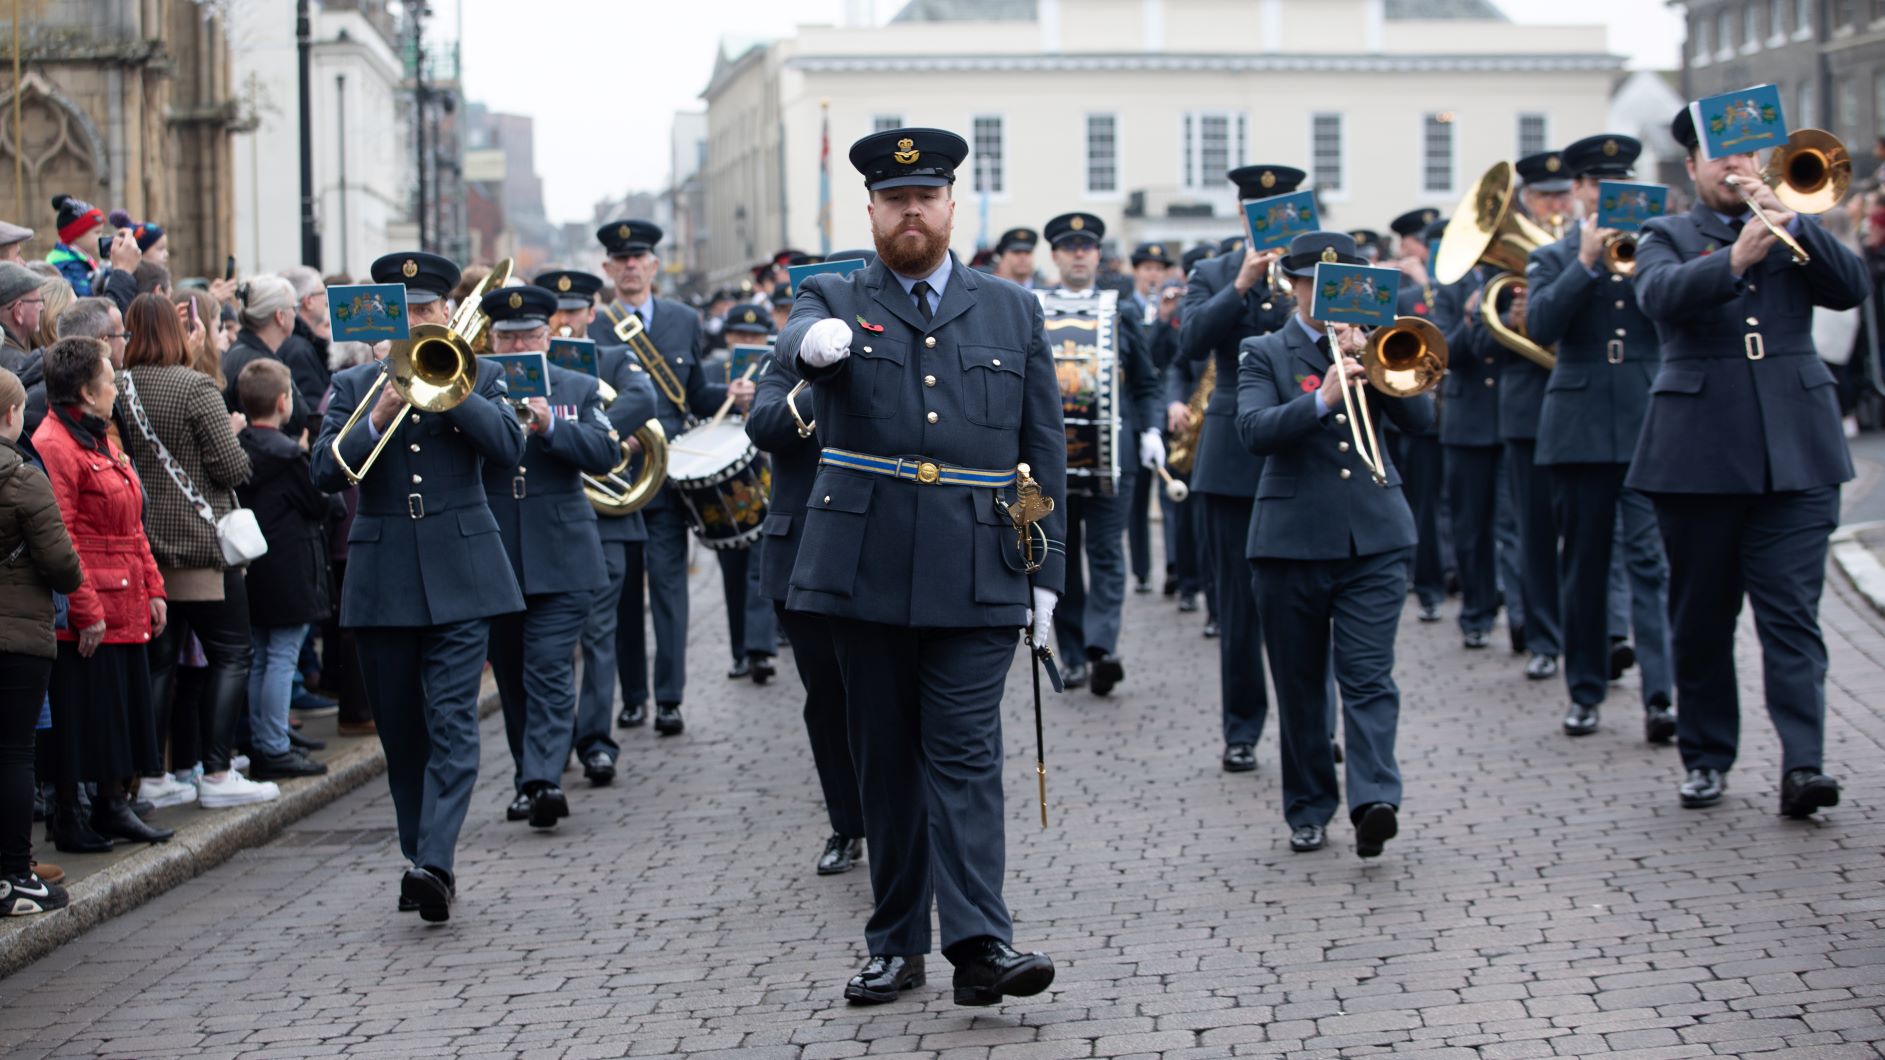 Image shows RAF band of musicians parading through town.